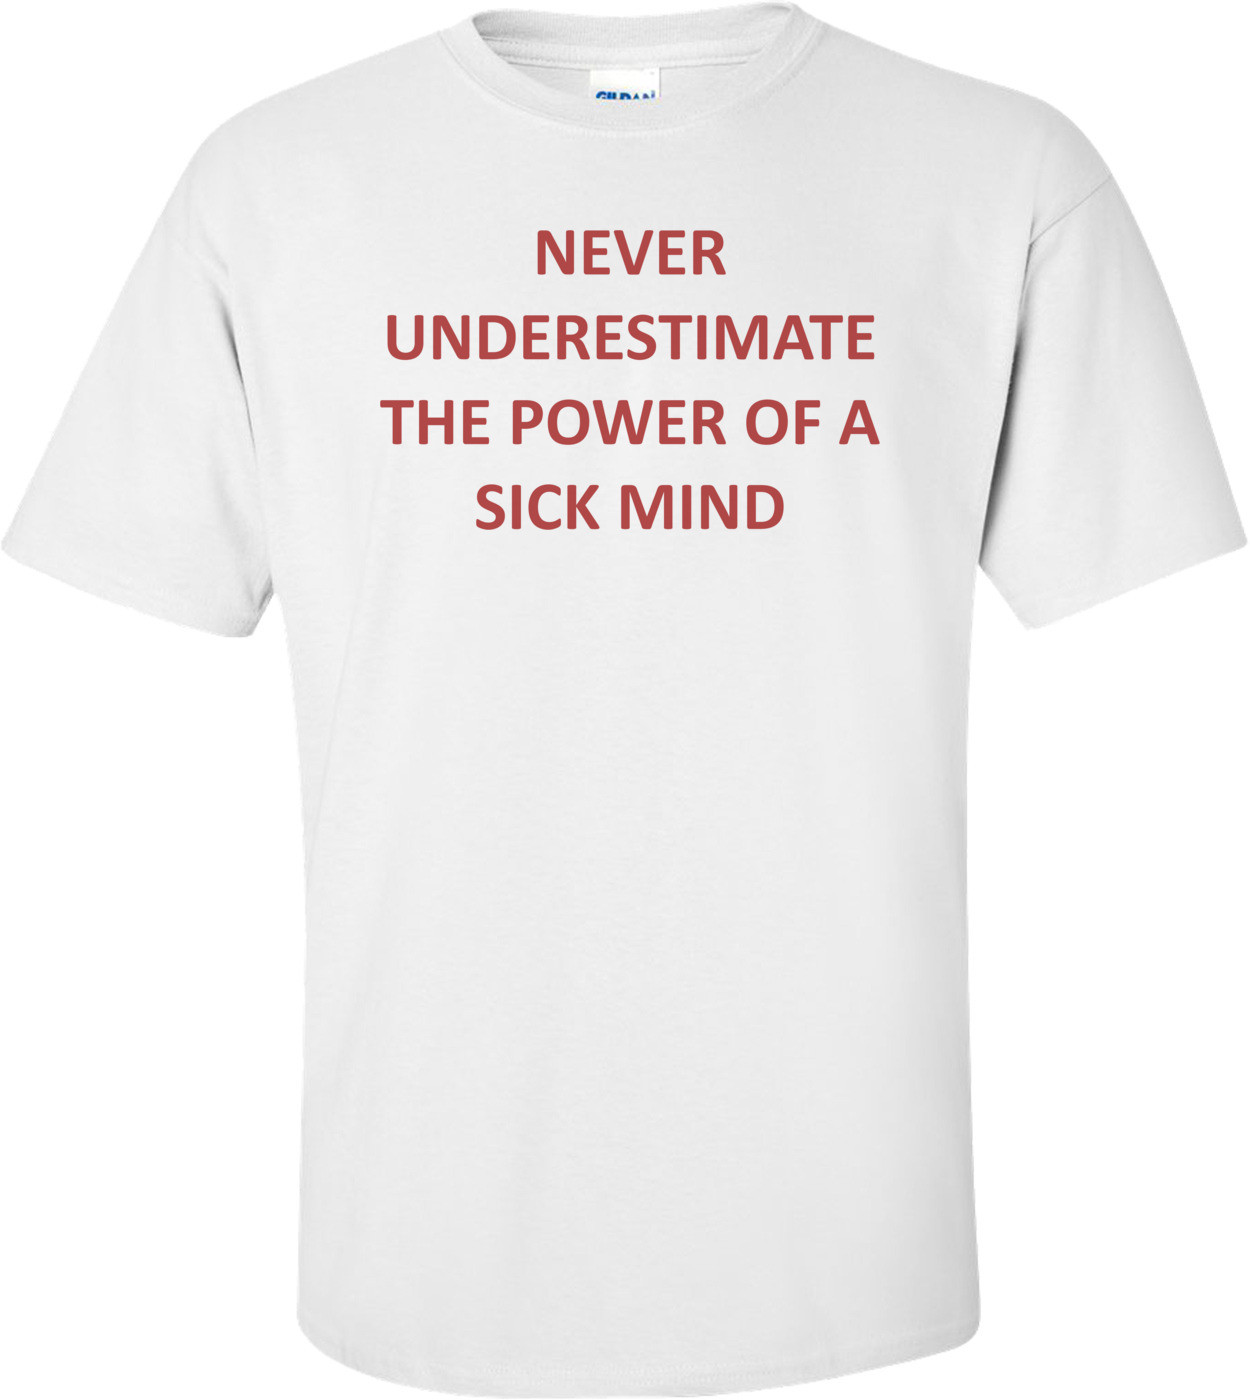 NEVER UNDERESTIMATE THE POWER OF A SICK MIND Shirt